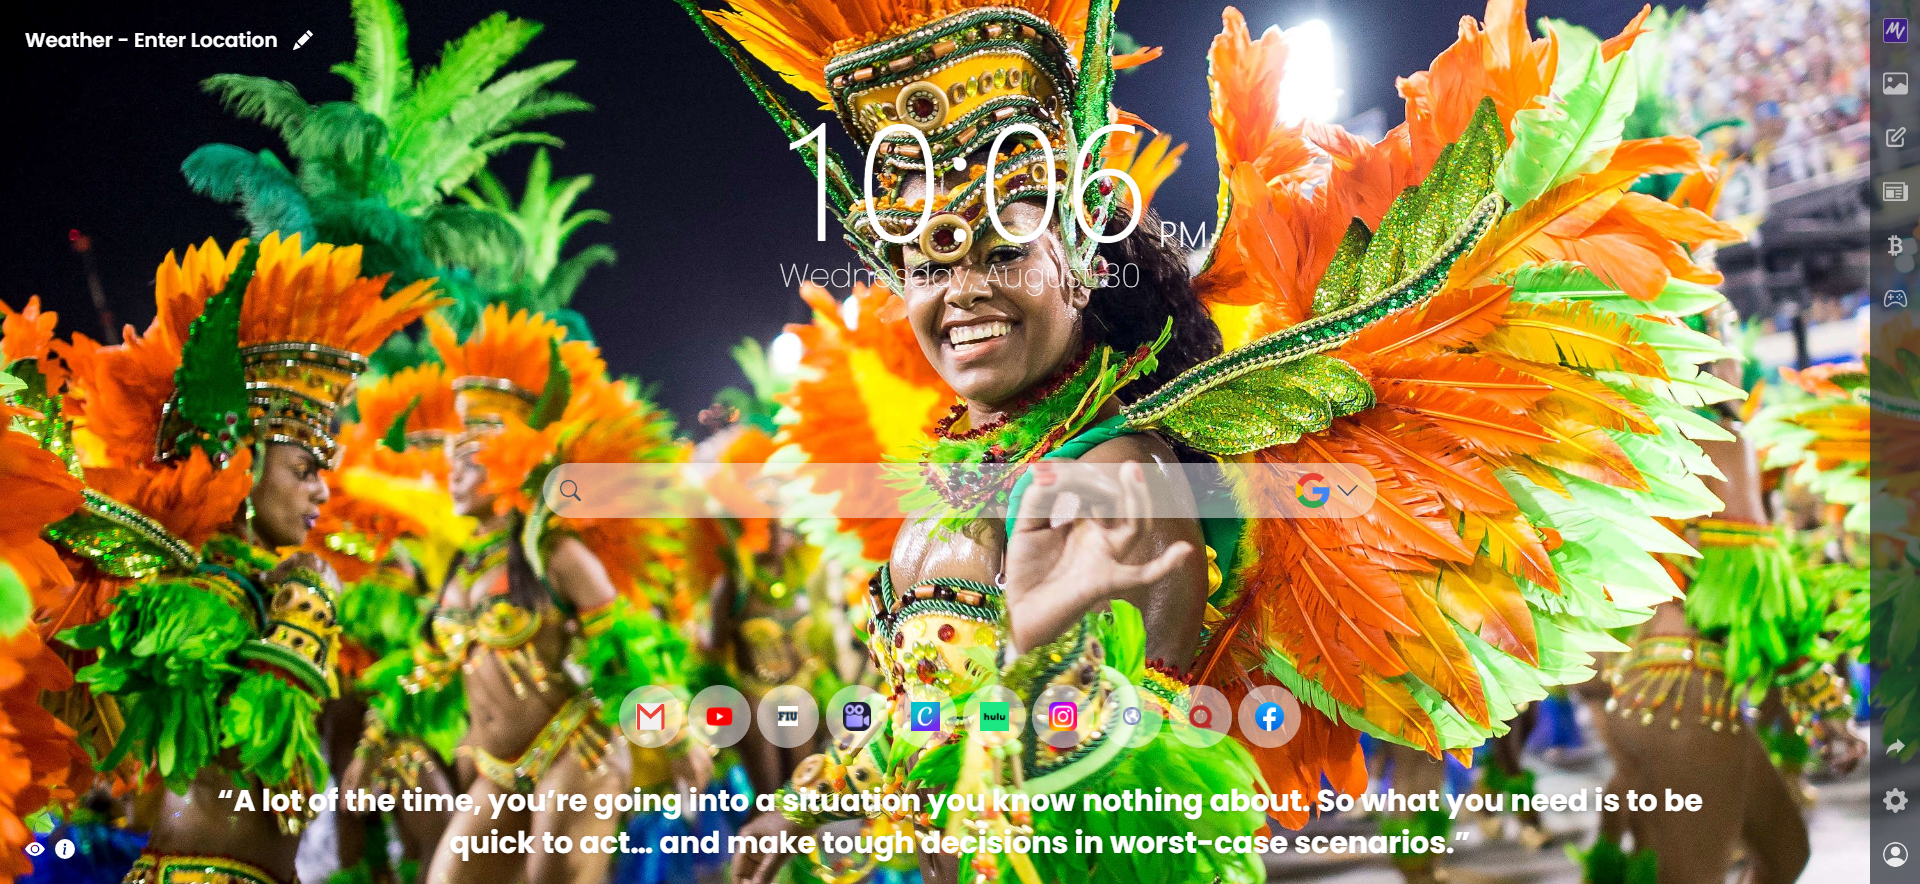 Carnivals, Celebrations, and Parties of Brazil